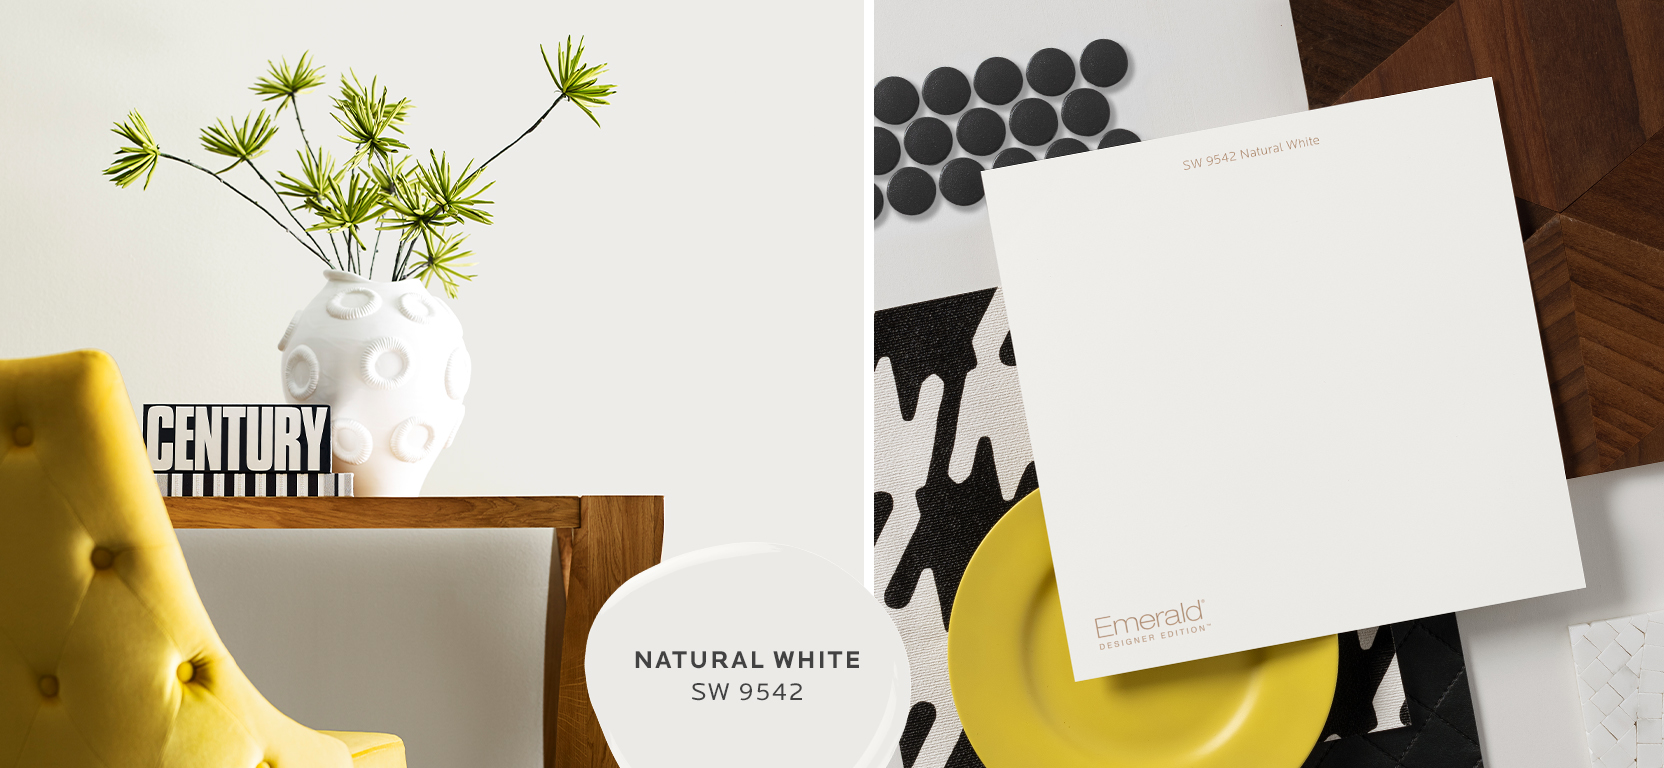 Detail shot of modern wooden table with yellow tufted chair, white vase filled with greenery in front of a Natural White wall; an inspirational mood board using Natural White.